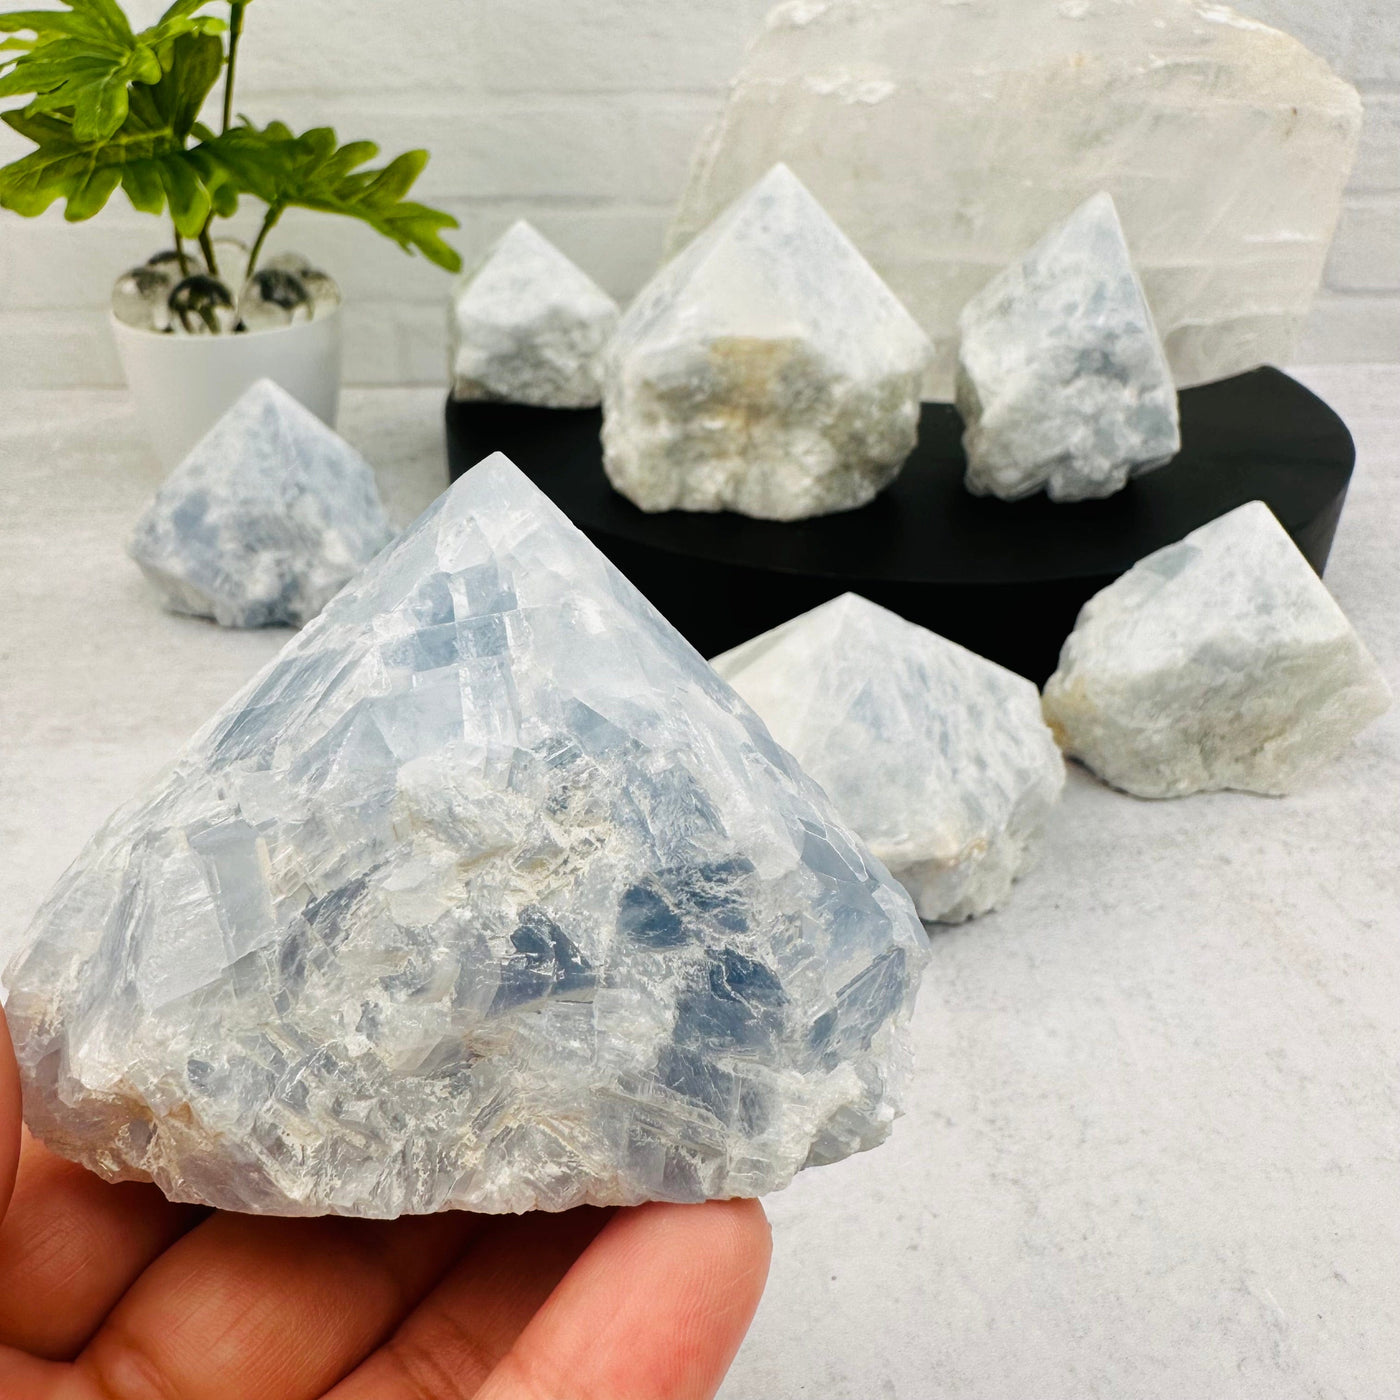 Blue Calcite Semi-Polished Point in hand for size reference 